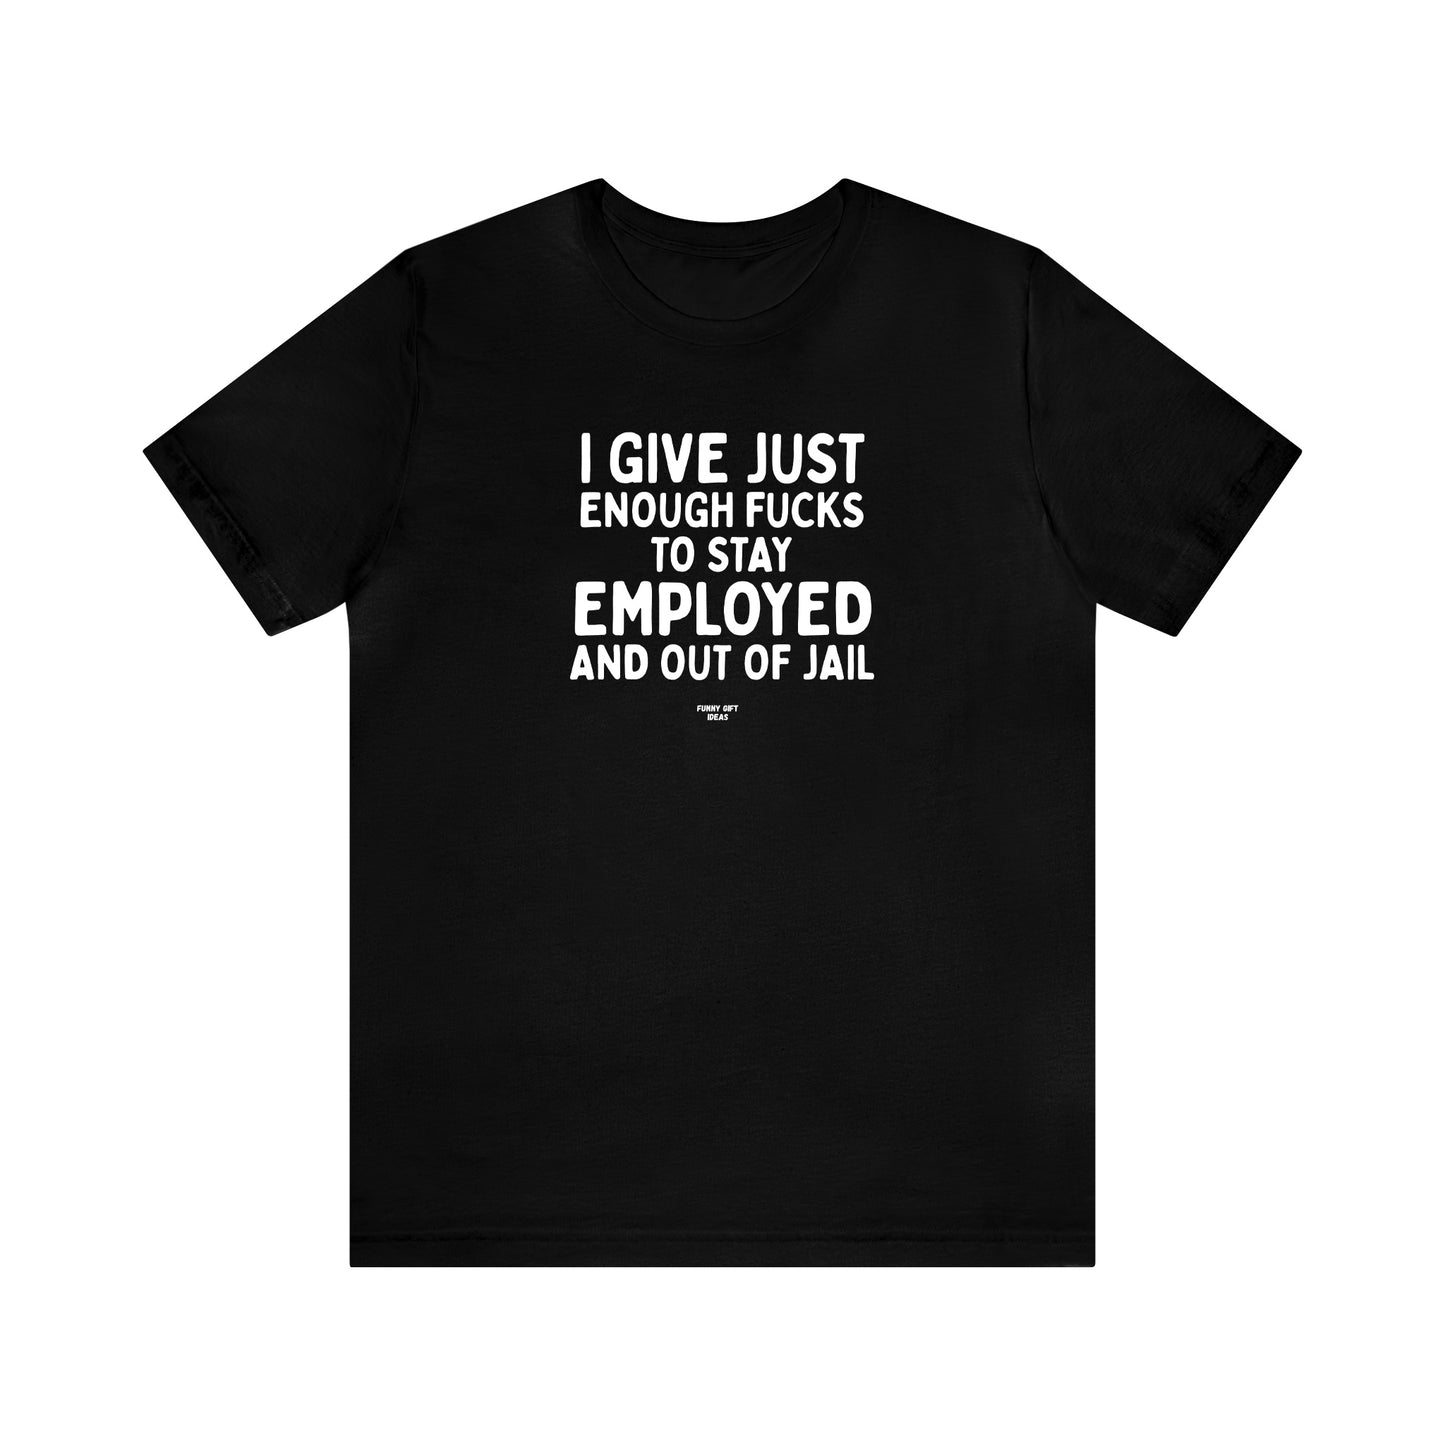 Mens T Shirts - I Give Just Enough Fucks to Stay Employed and Out of Jail - Funny Men T Shirts